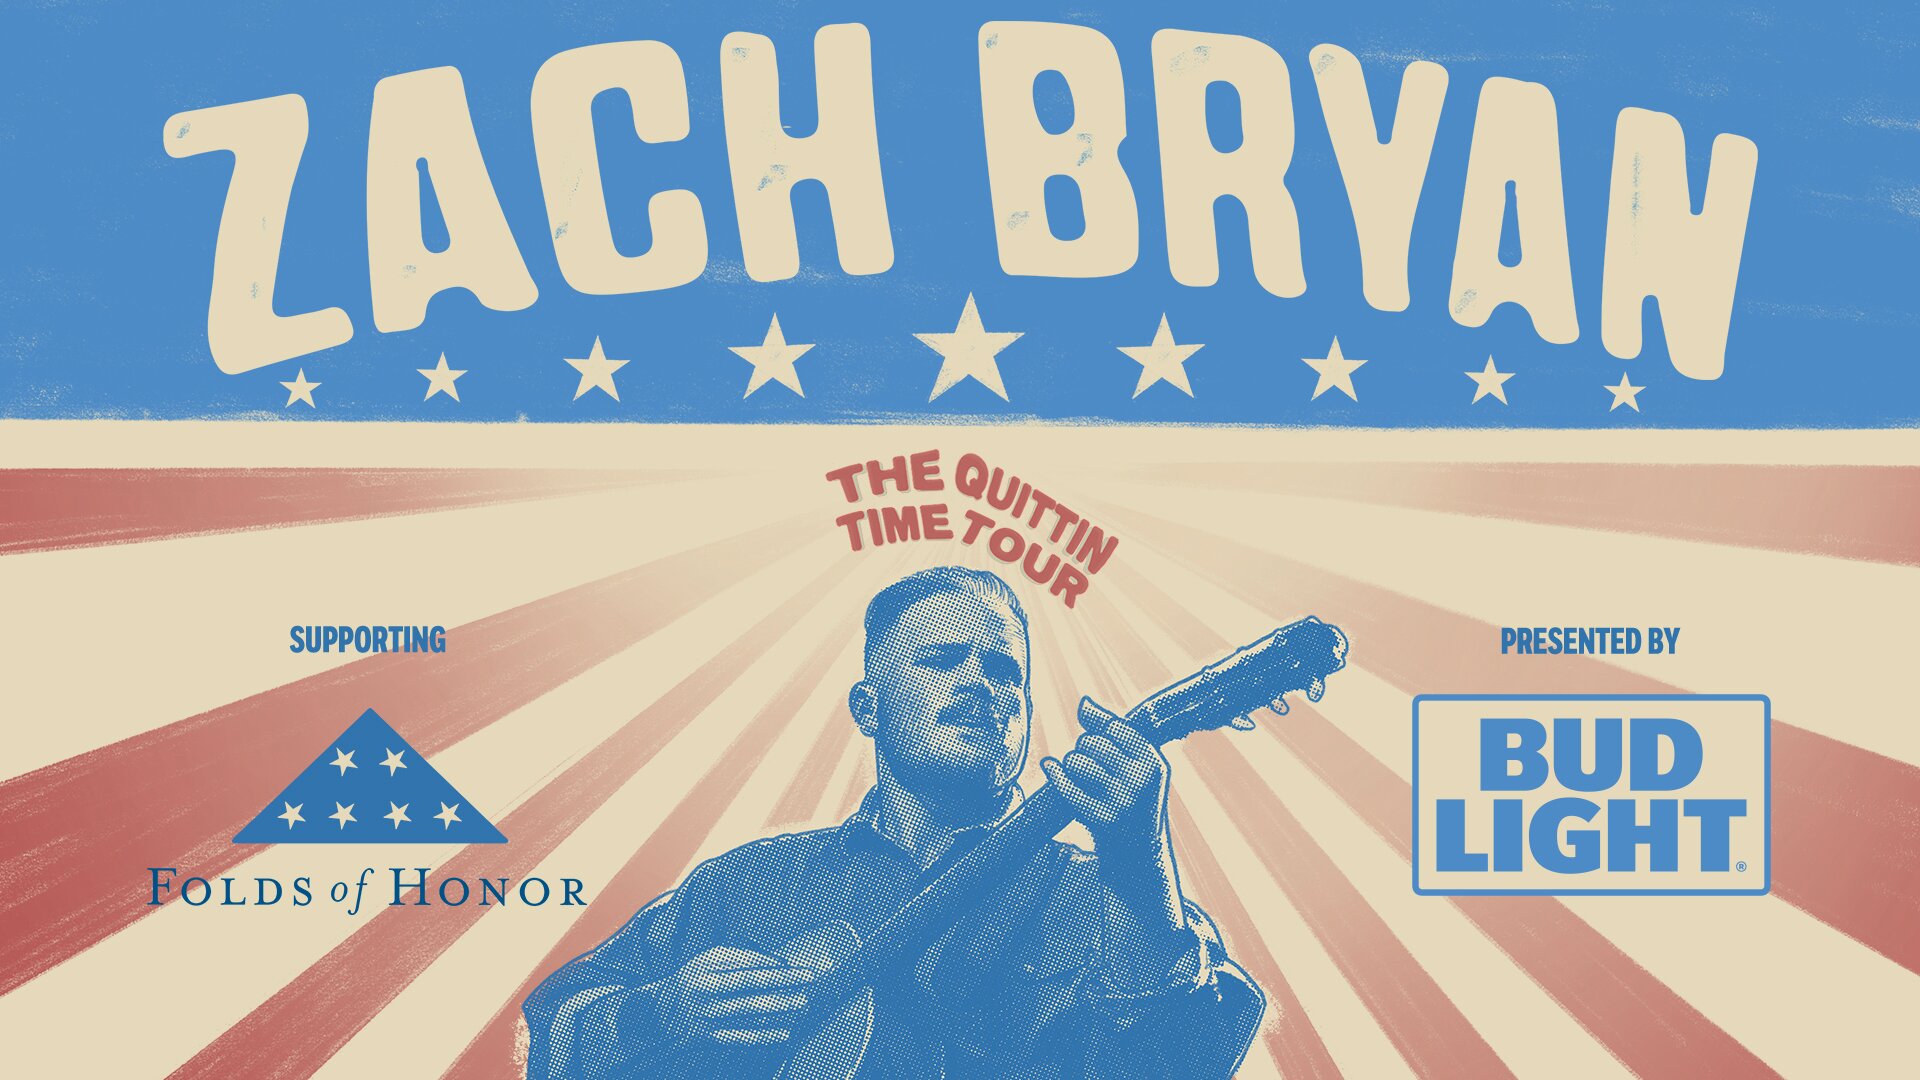 Bud Light Introduces the ‘Bud Light Quittin’ Time Tour Experience’, Giving Fans The Chance To Play Pool with GRAMMY Award-Winning Country Artist Zach Bryan